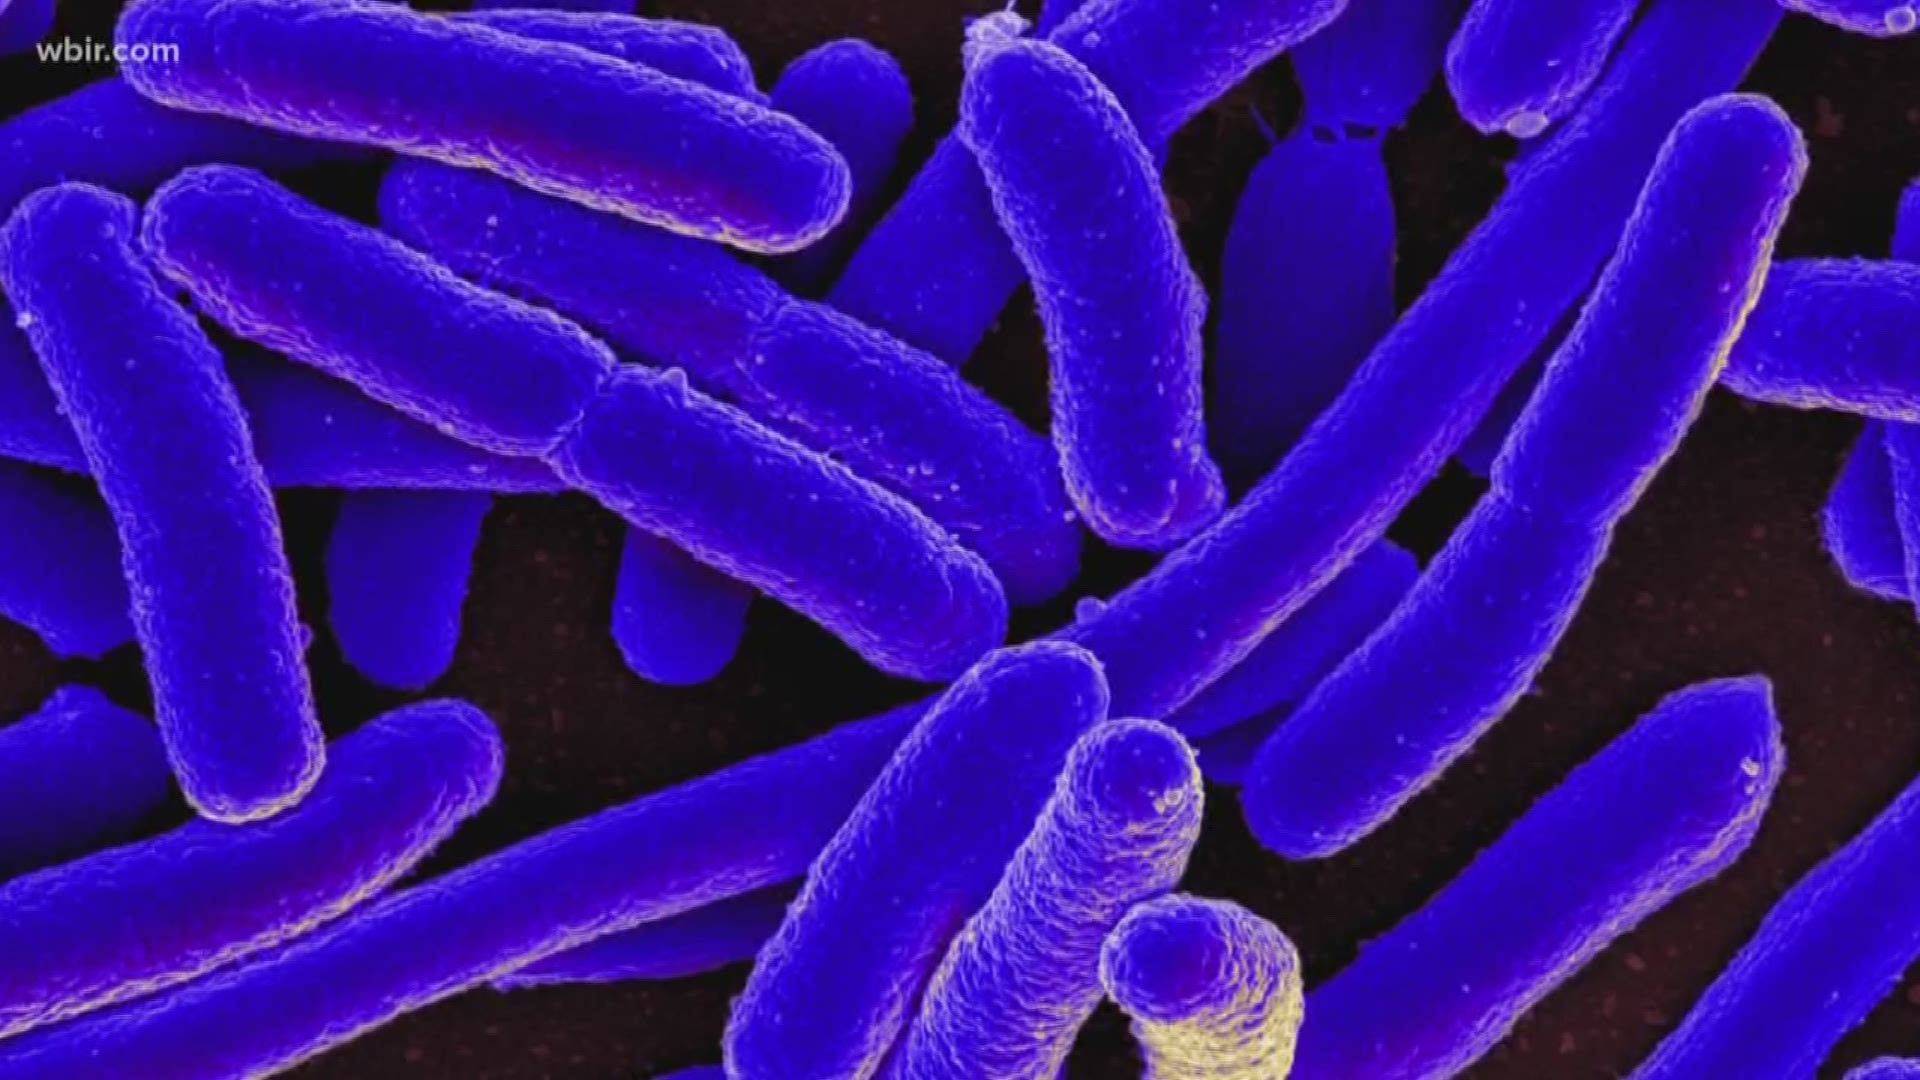 East Tennessee Children's Hospital says it's treating the biggest E. coli outbreak the hospital has seen in decades. The Knox Co. Health Department is investigating what caused the cases. June 5, 2018.